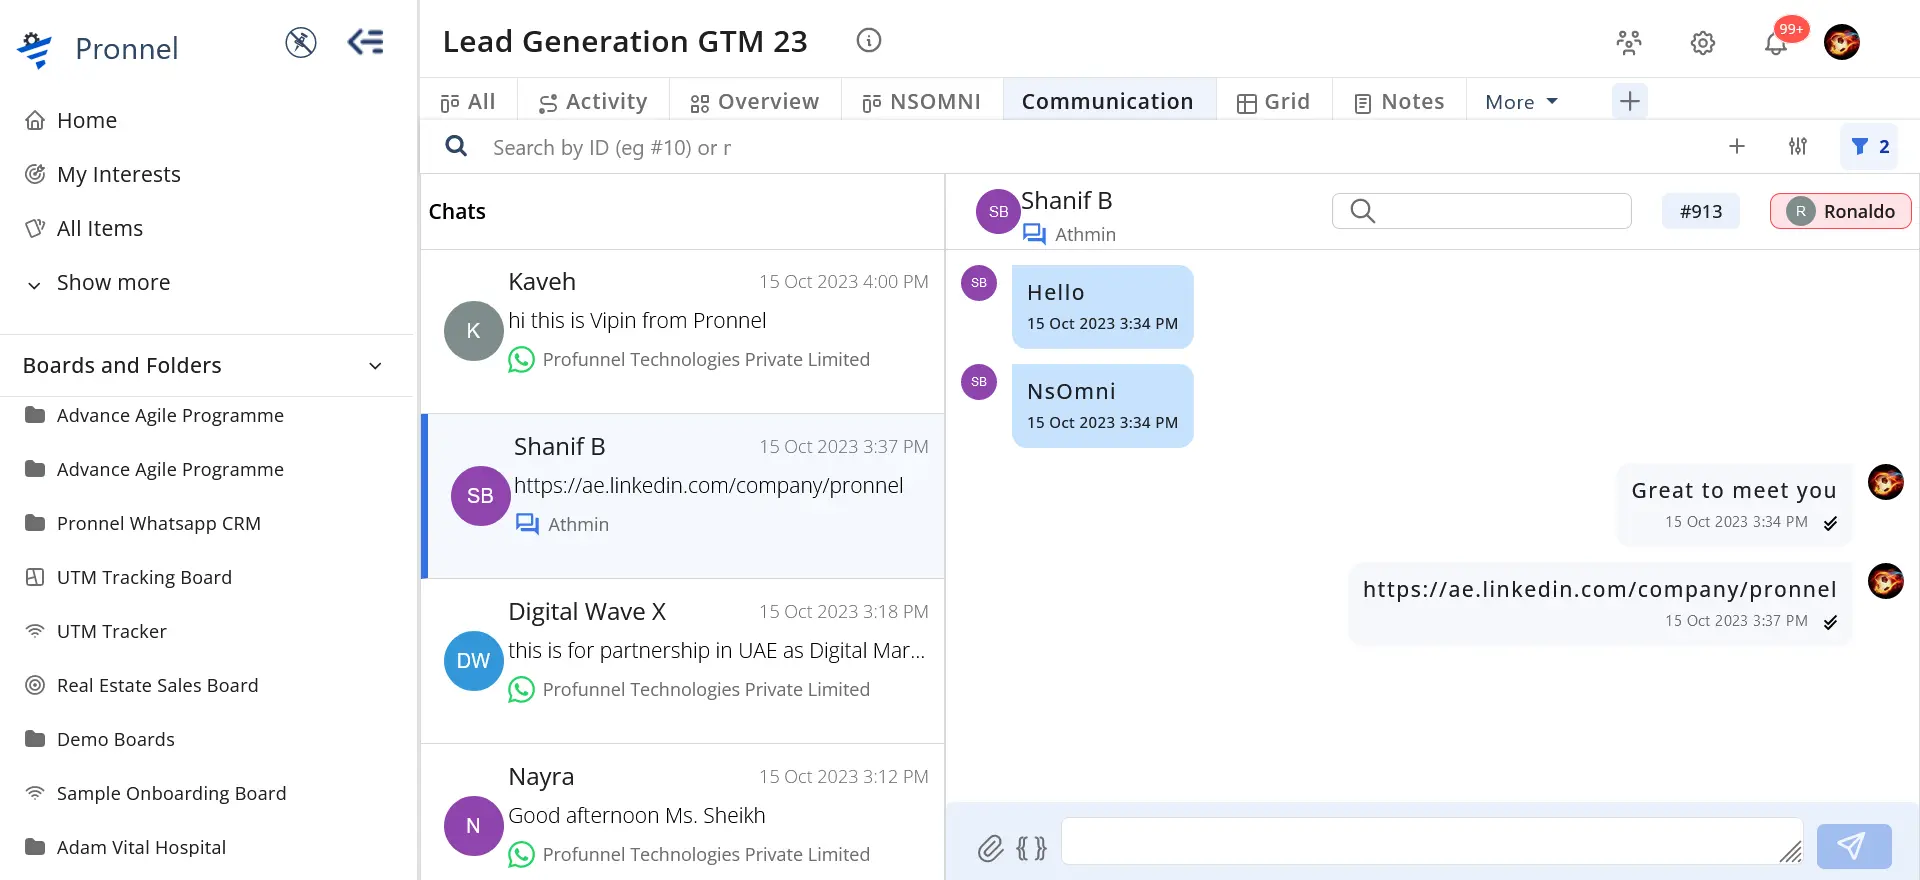 Communications View in Pronnel. Connect all your chat channels to your CRM- Google Business Chat, WhatsApp, Facebook Messenger, Instagram, Viber, Telegram, Line, Signal.